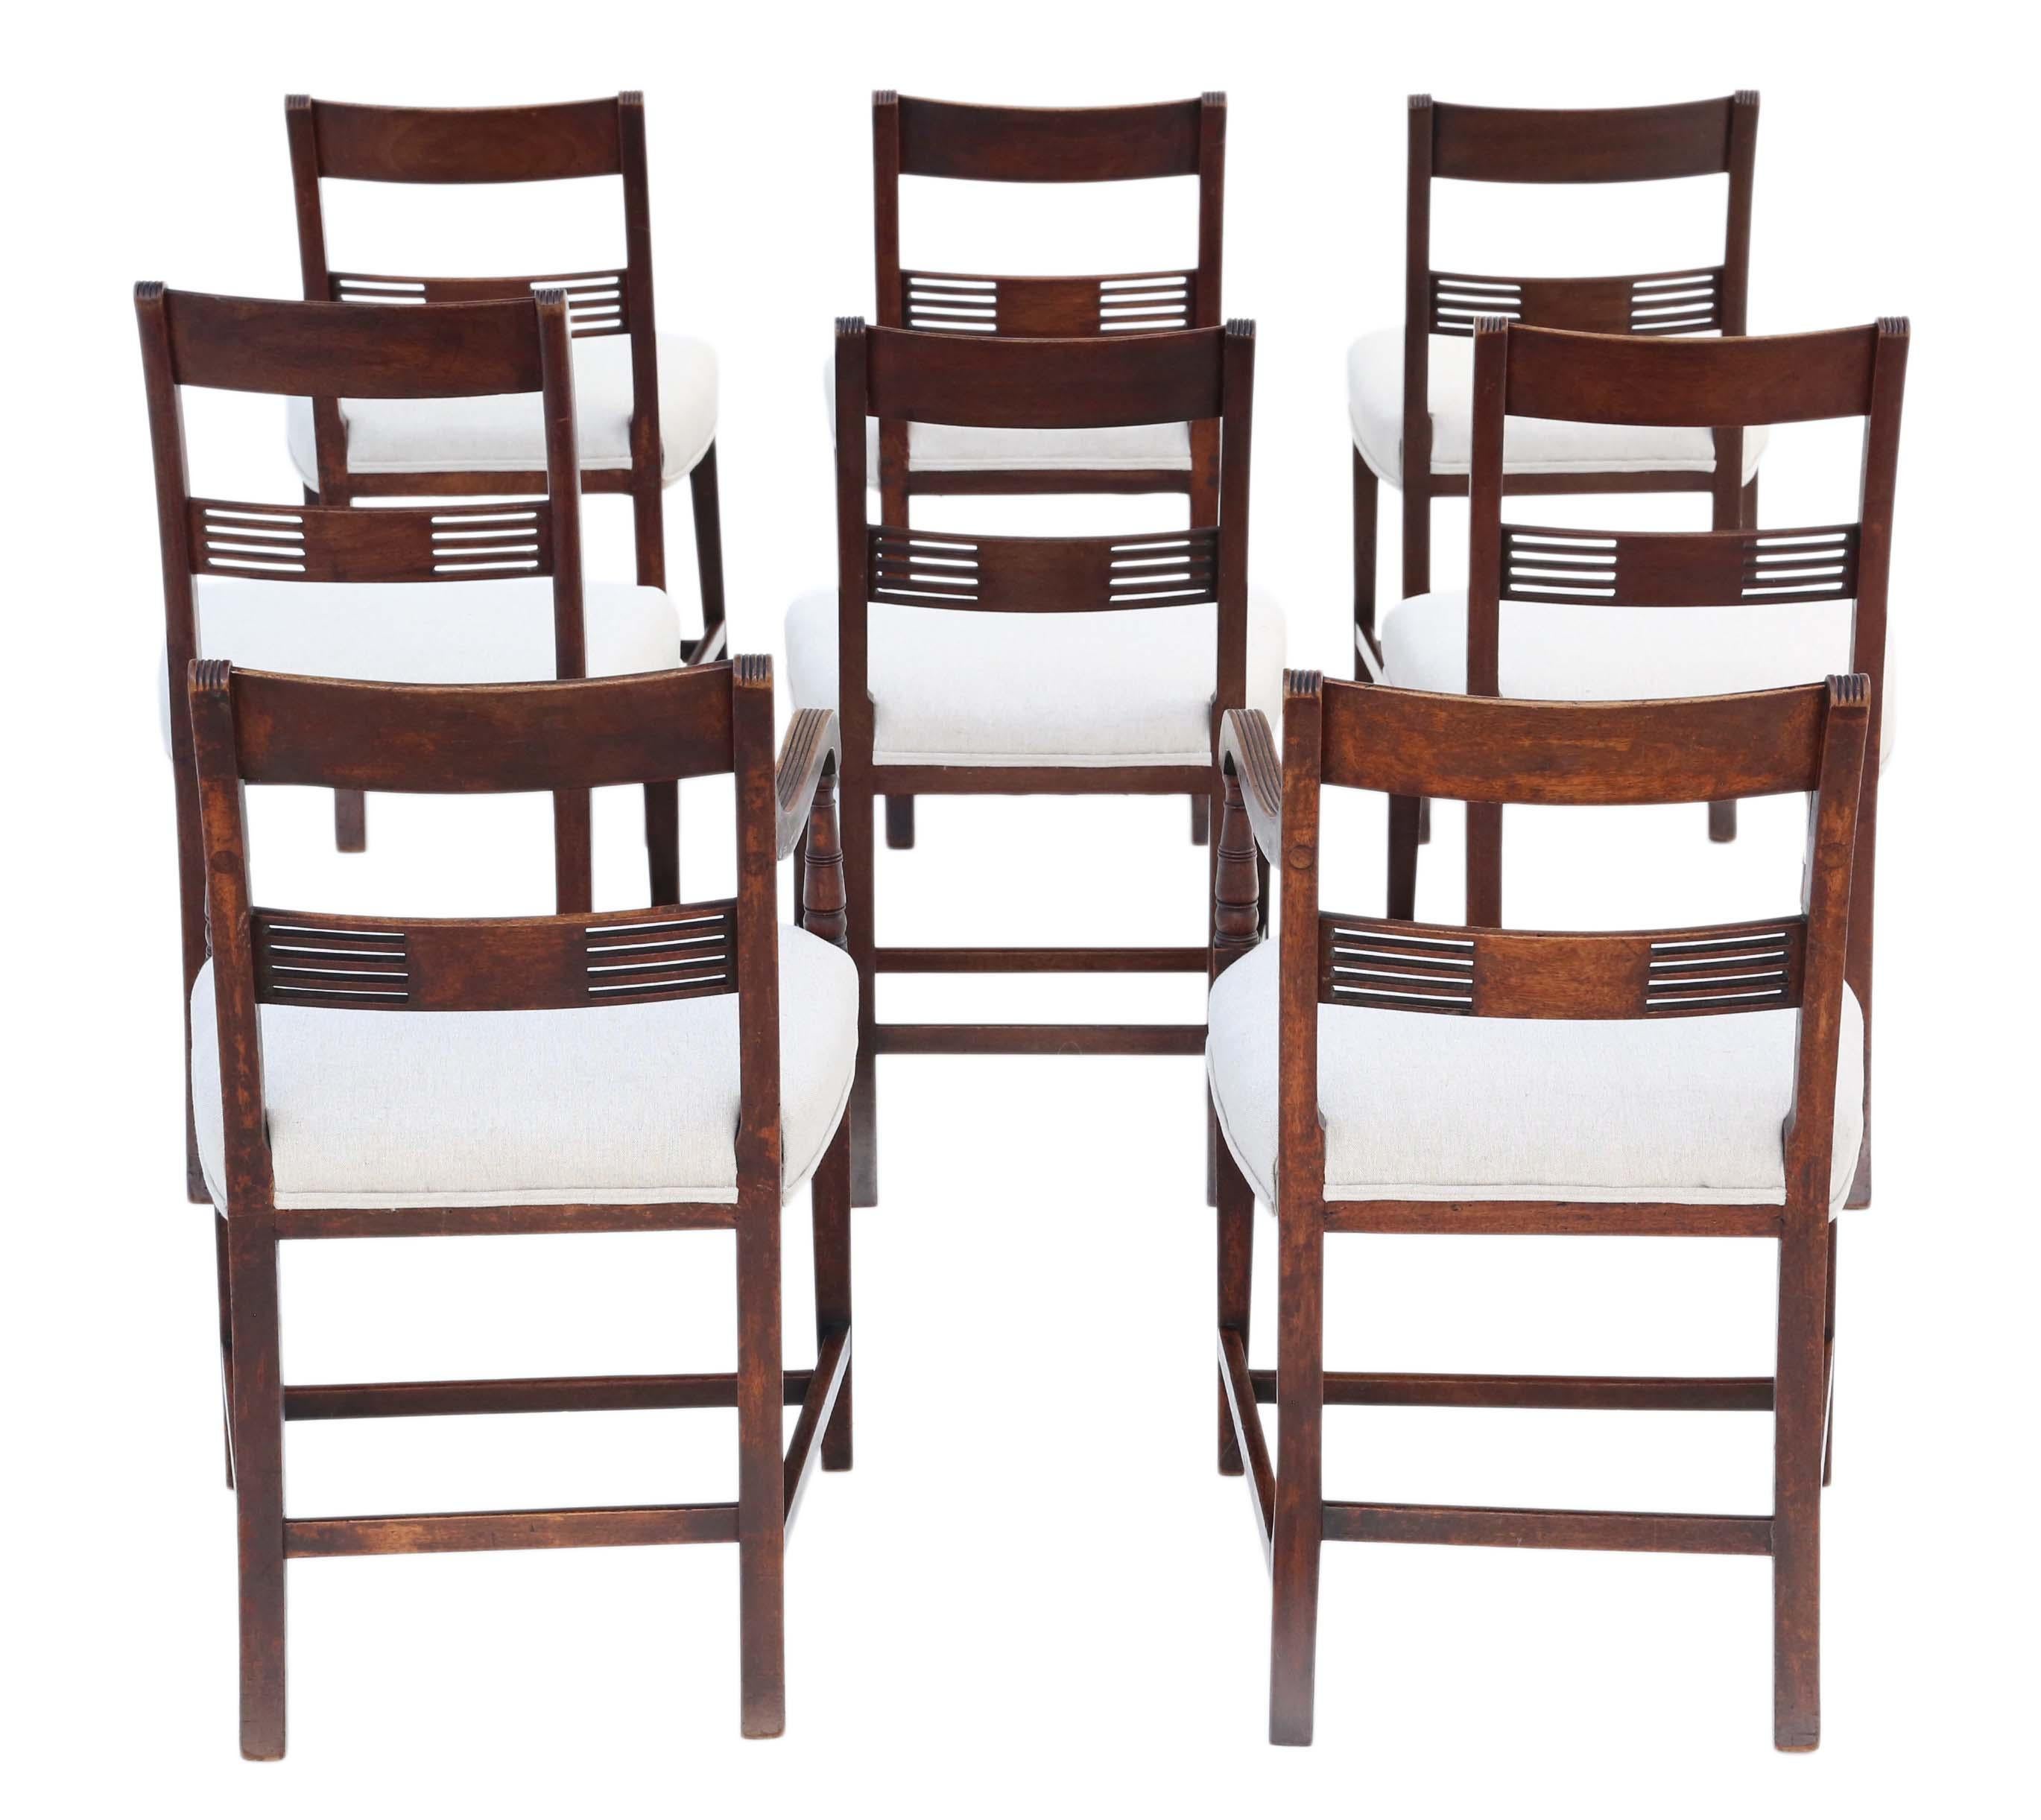 Antique fine quality set of 8 (6+2) Georgian circa 1820 inlaid mahogany dining chairs.

No loose joints.

New upholstery in a natural linen fine oatmeal fabric.

Overall maximum dimensions:

Carver 53cm W x 52cm D x 86cm H (47cm H seat when